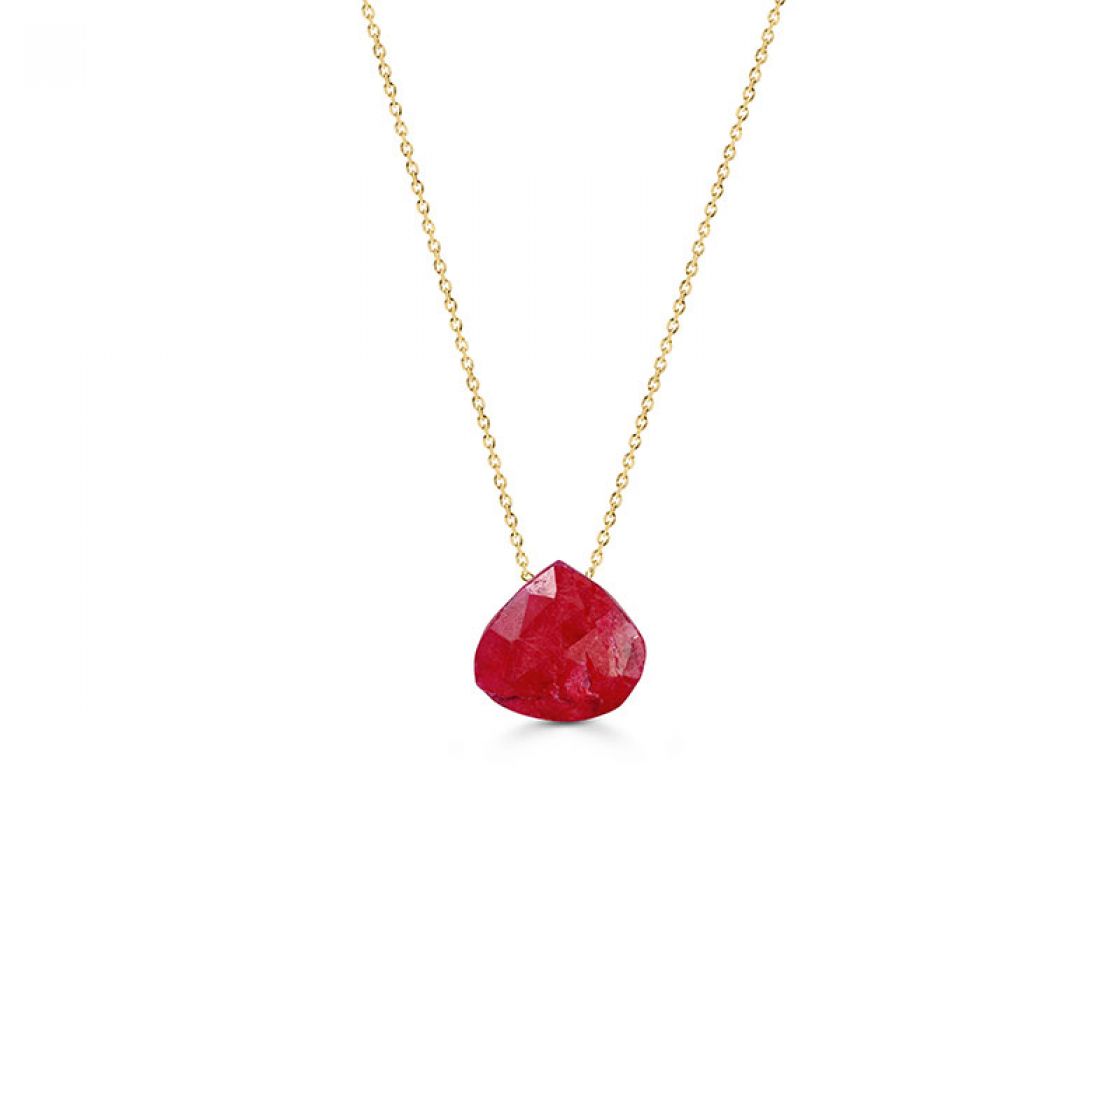 A drop cut Ruby stone on a 14kt gold chain